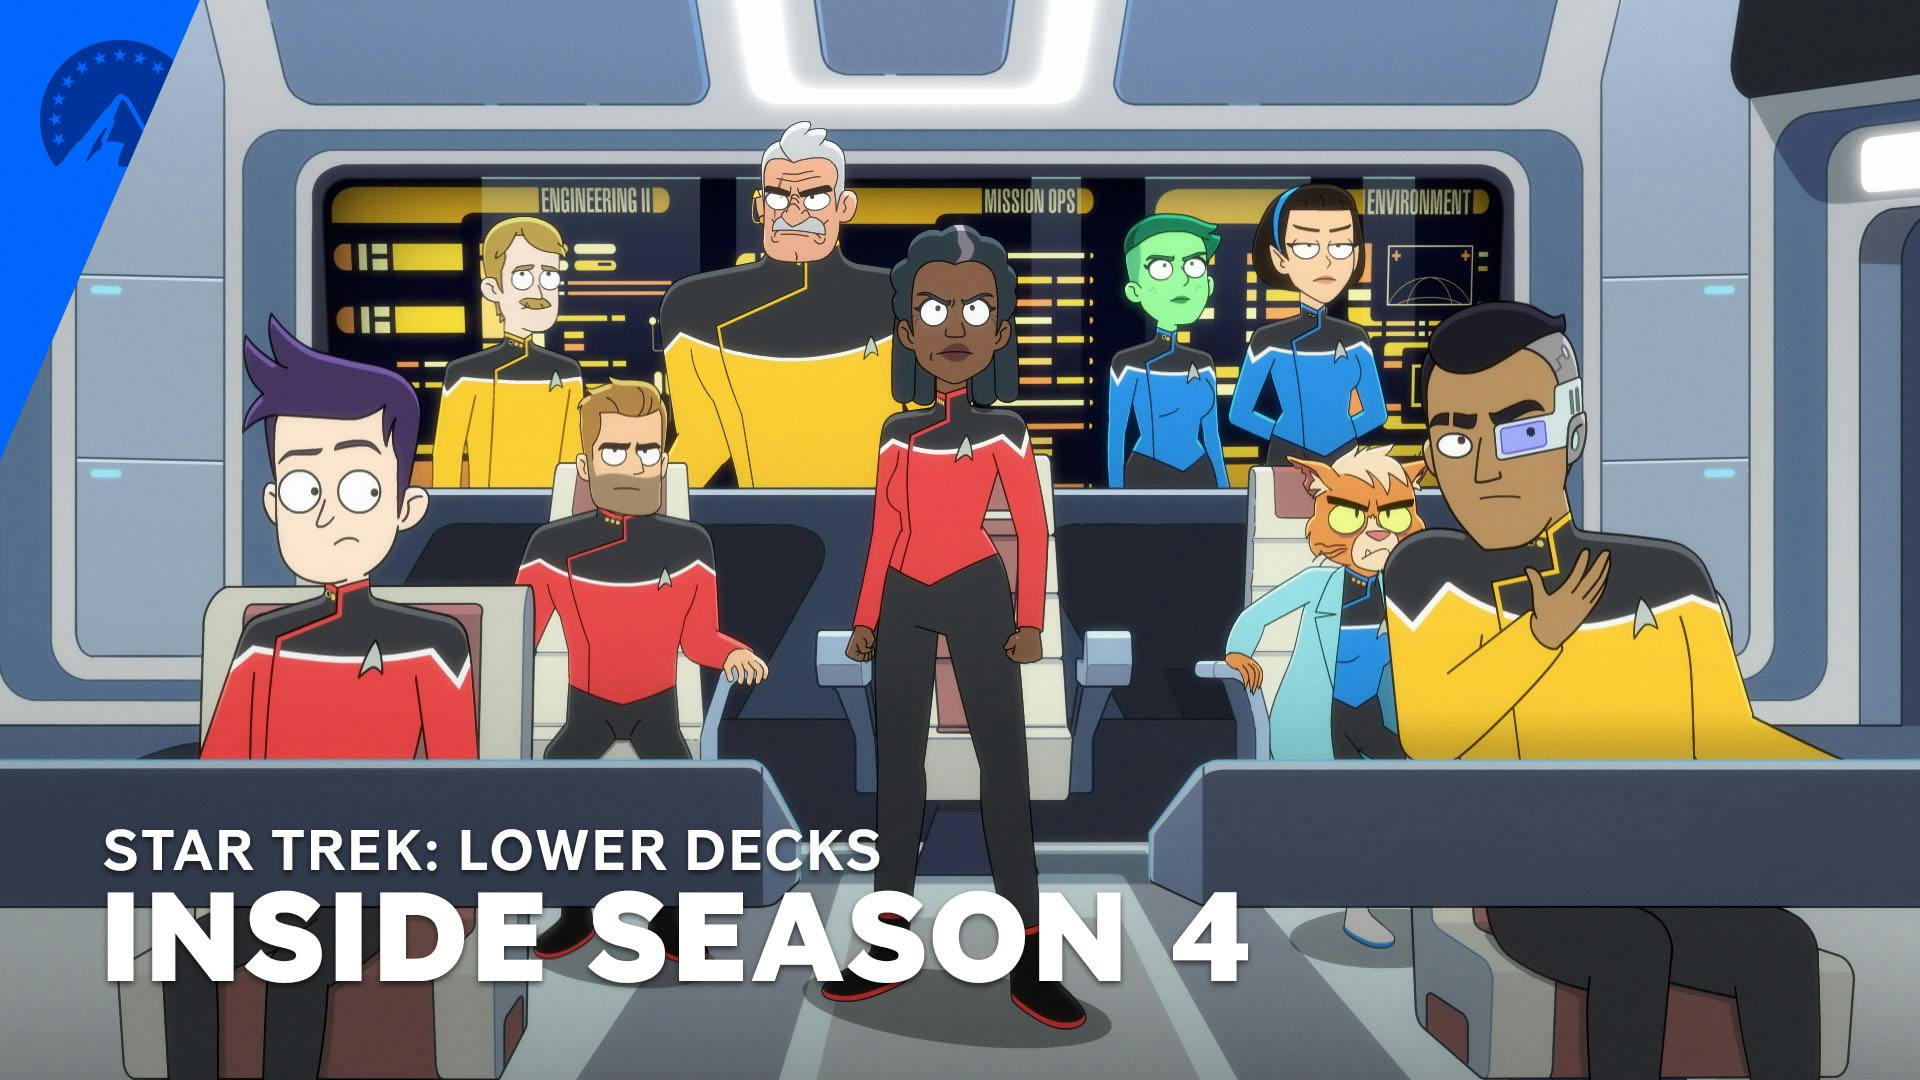 Aboard the Cerritos bridge, Boimler and Rutherford sit at the helm and tactical. Freeman stands in front of the captain's chair as Ransom and Dr. T'Ana flank her on each side, while Tendi and T'Lyn stand in the back along with Billups and Shaxs